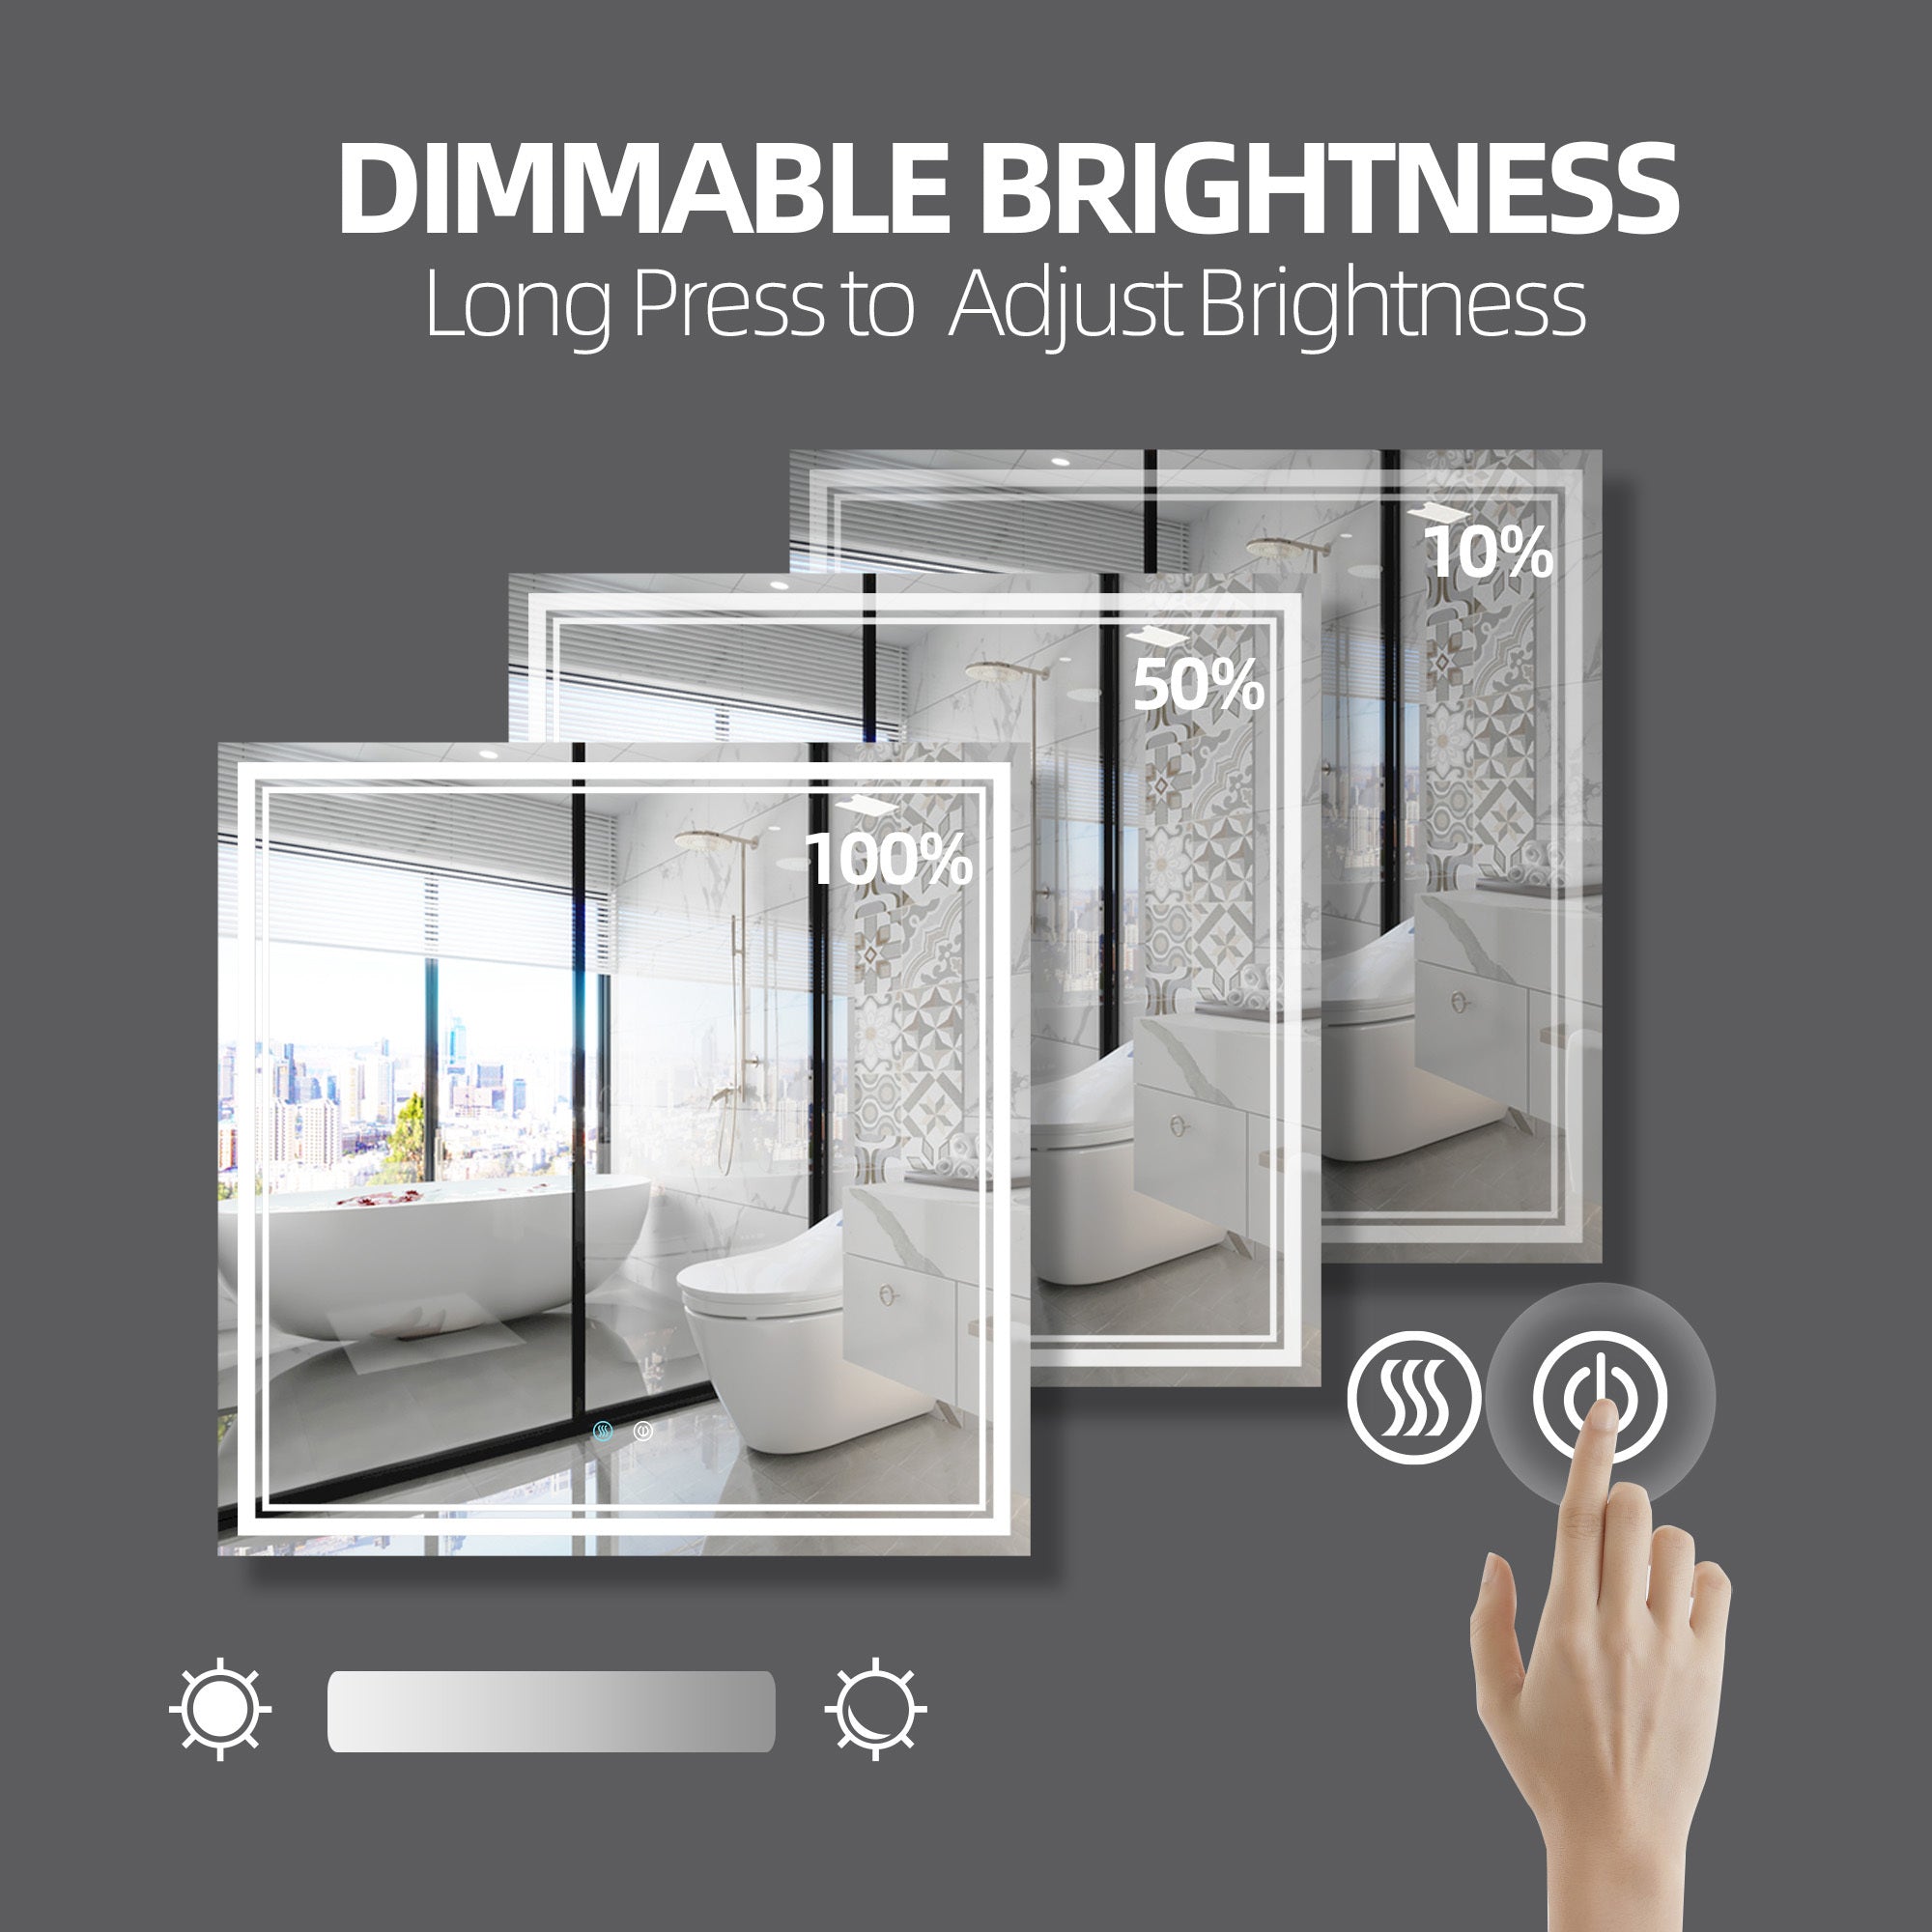 LED Mirror for Bathroom, Adjustable 3 Color, Dimmable Vanity Mirror with Lights, Anti-Fog, Touch Control Wall Mounted Bathroom Mirror 36 x 36 Vertical